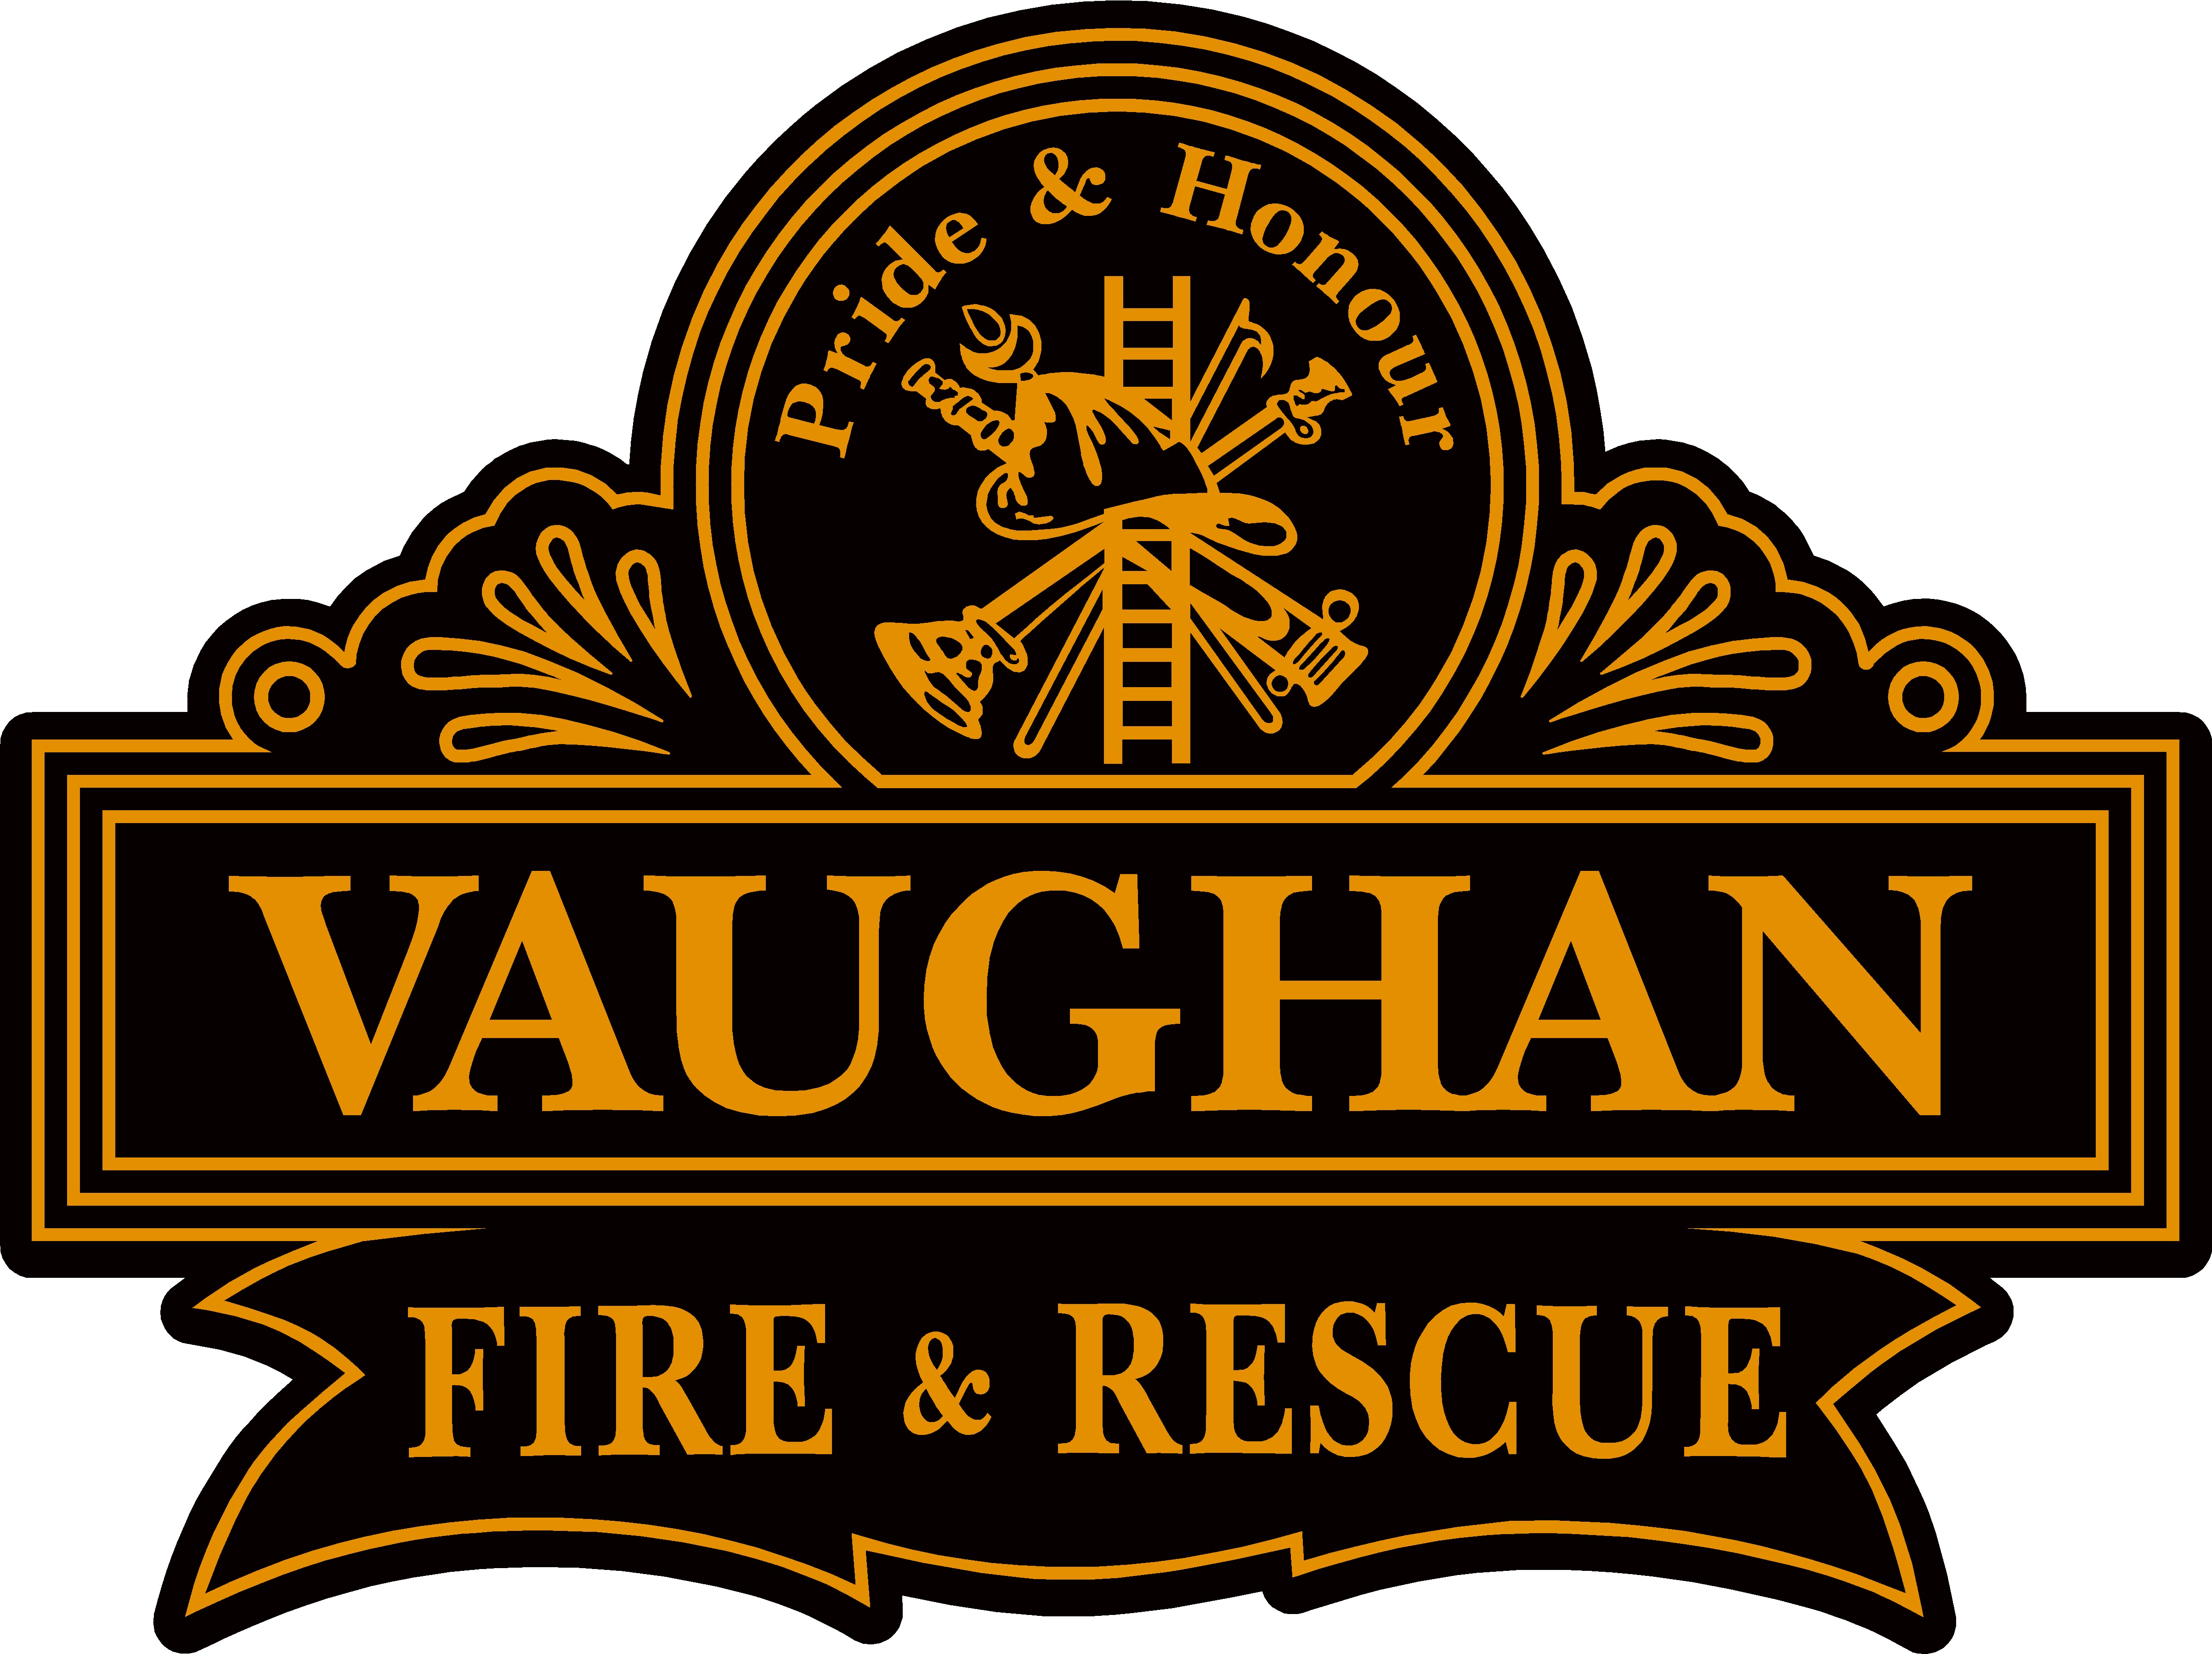 Vaughan Fire and Rescue Service crest image